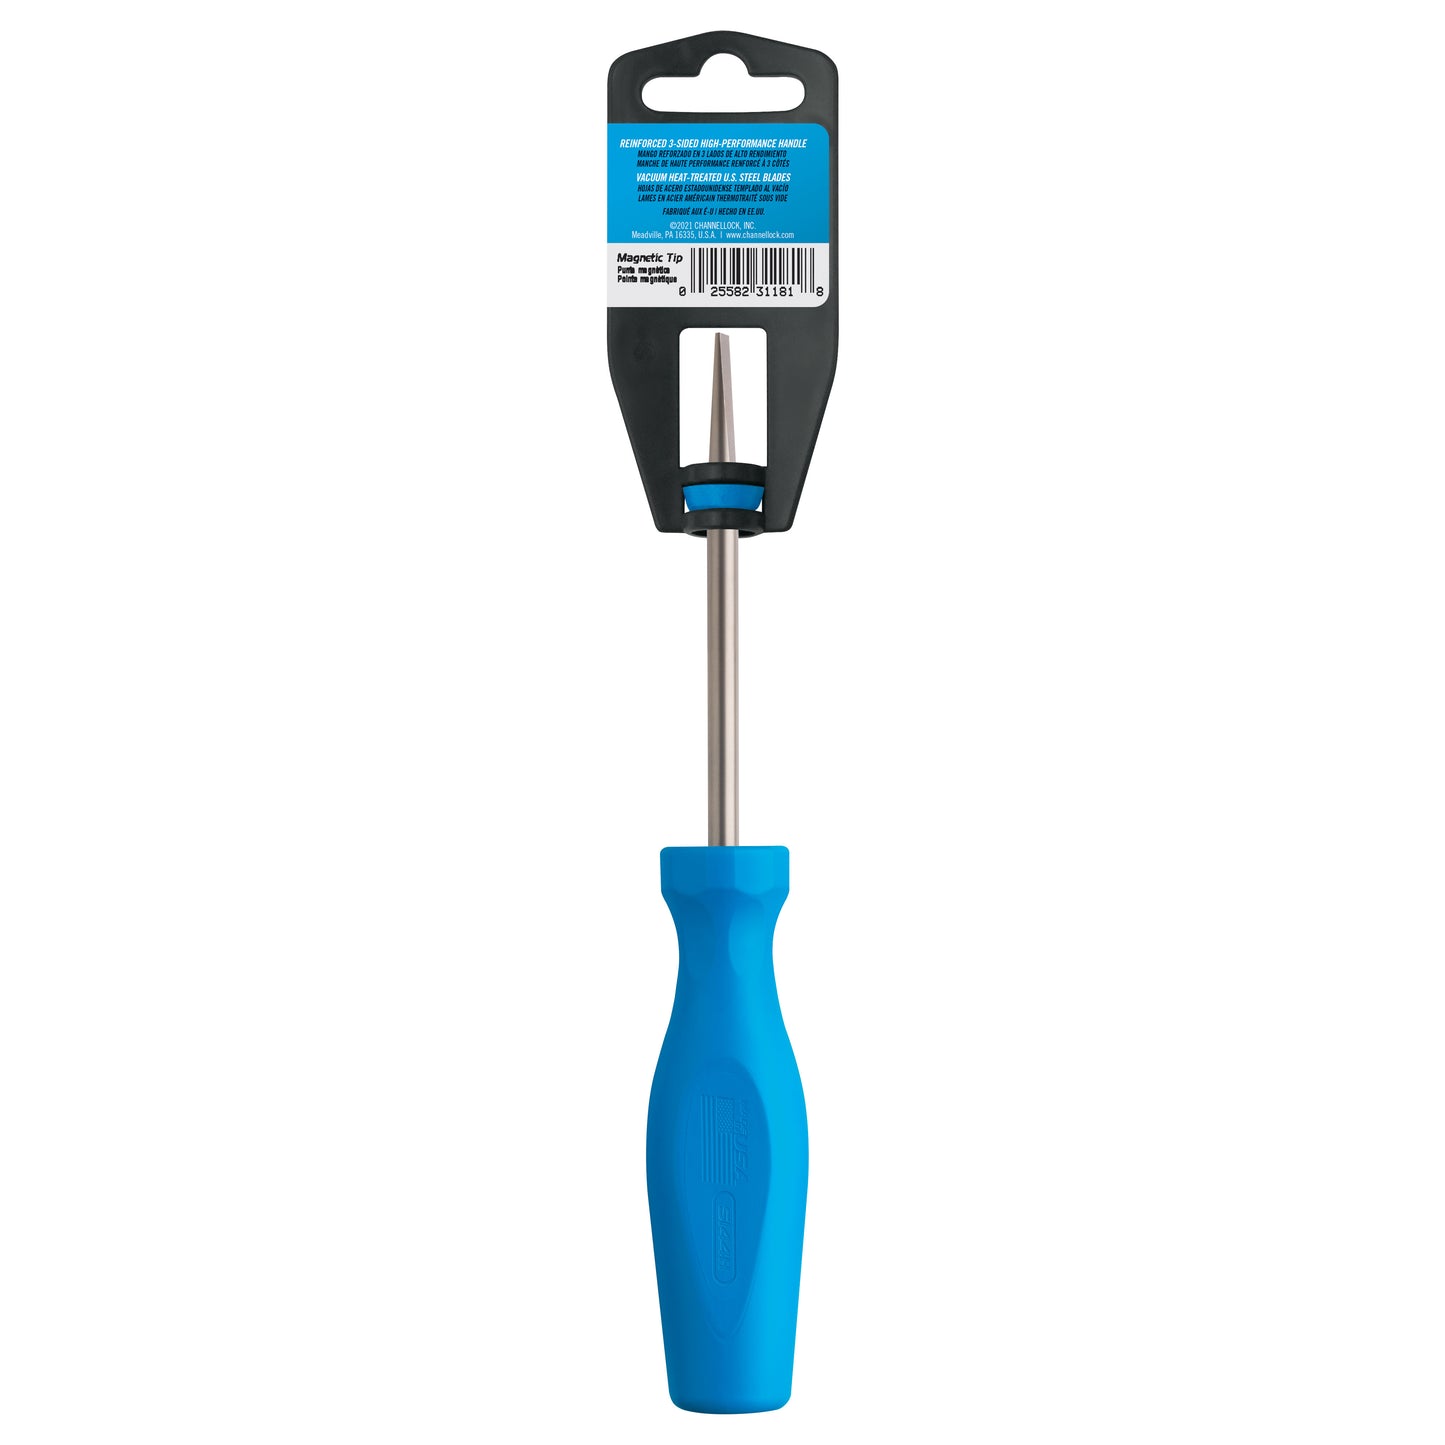 Slotted 1/4 x 4-inch Professional Screwdriver (S144H)